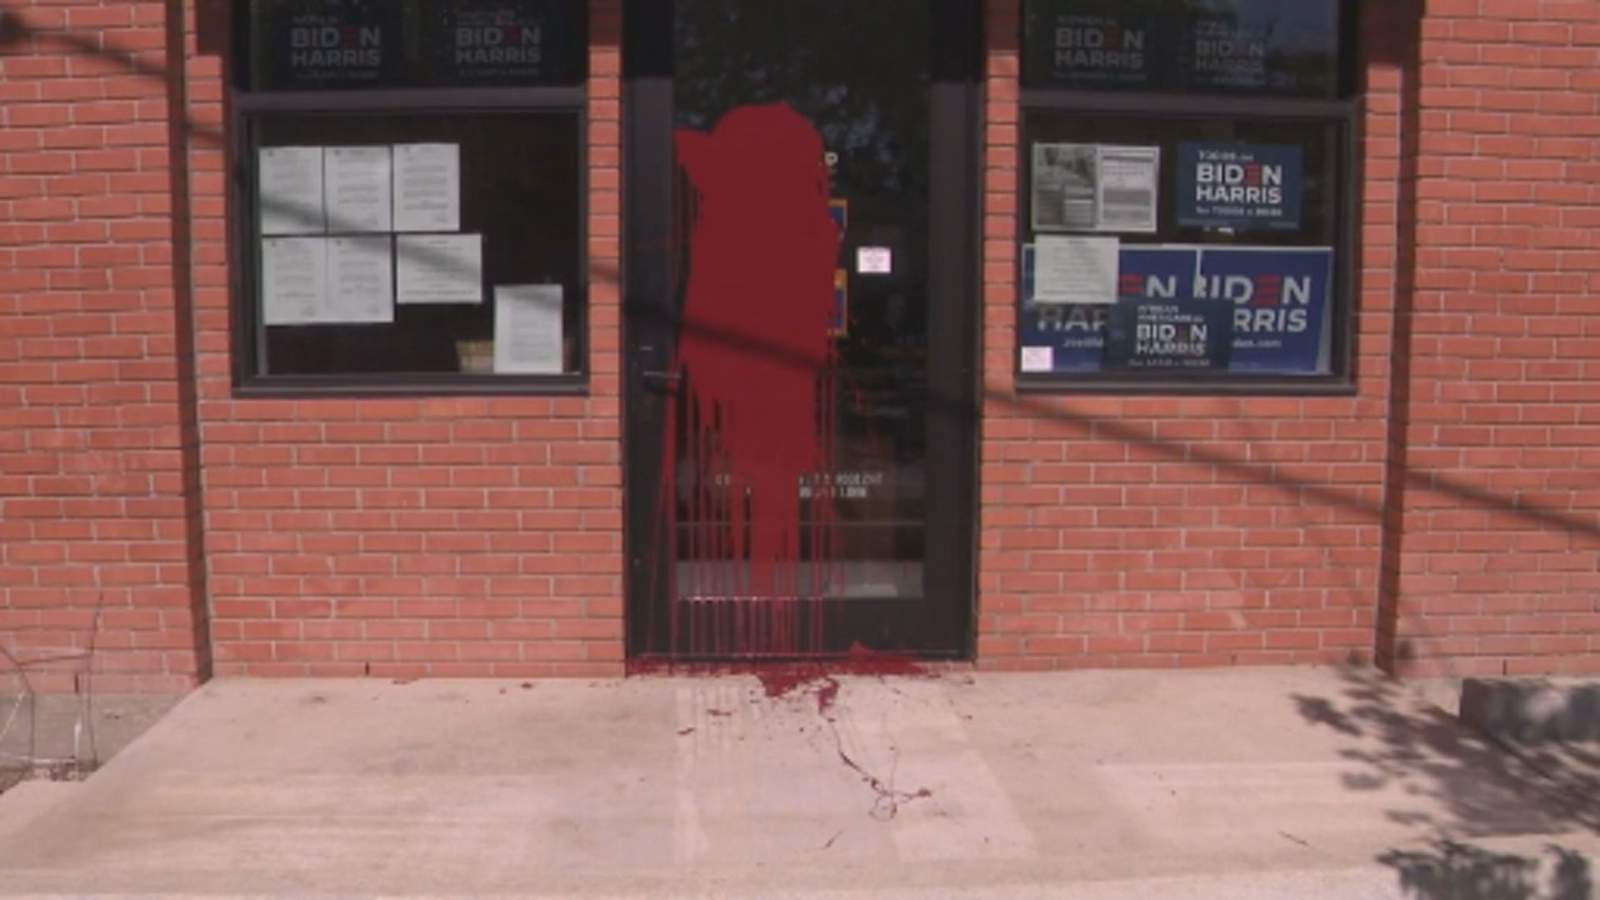 Harris County Democratic Headquarters vandalized with red paint, graffiti